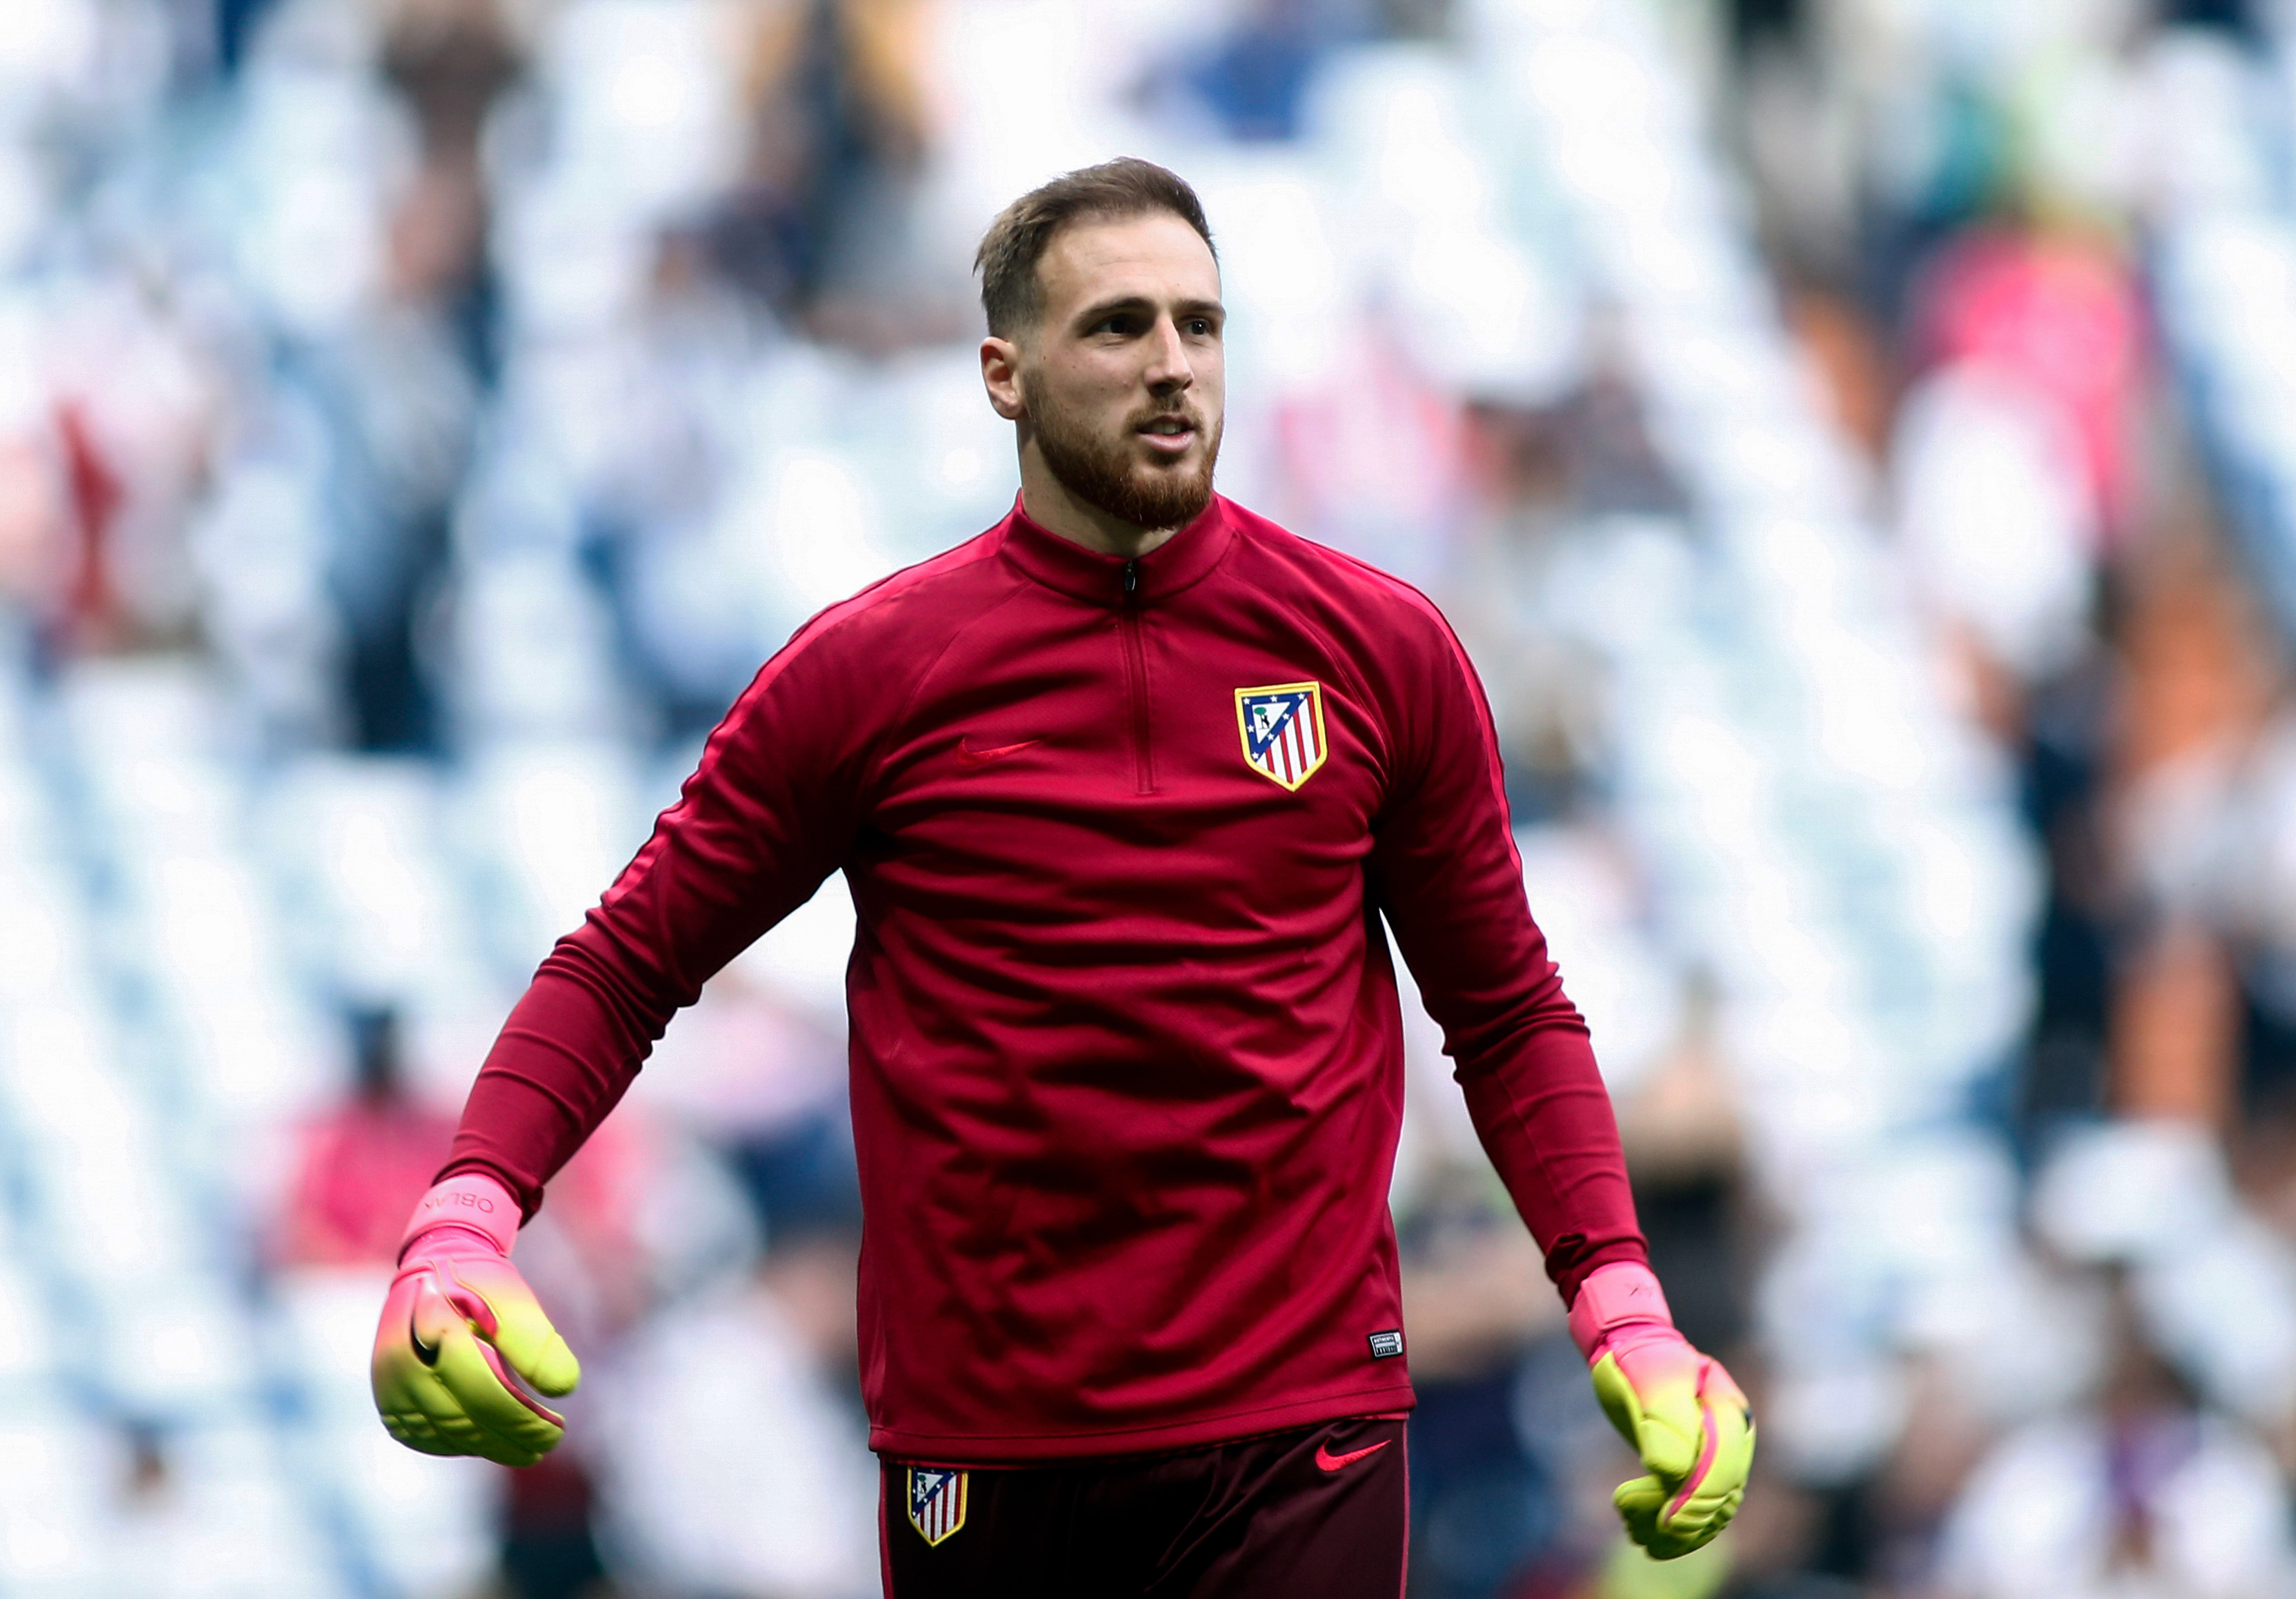 Atletico Madrid's Slovenian goalkeeper Jan Oblak warms up before the UEFA Champions League semifinal first leg football match Real Madrid CF vs Club Atletico de Madrid at the Santiago Bernabeu stadium in Madrid, on May 2, 2017. / AFP PHOTO / OSCAR DEL POZO        (Photo credit should read OSCAR DEL POZO/AFP/Getty Images)